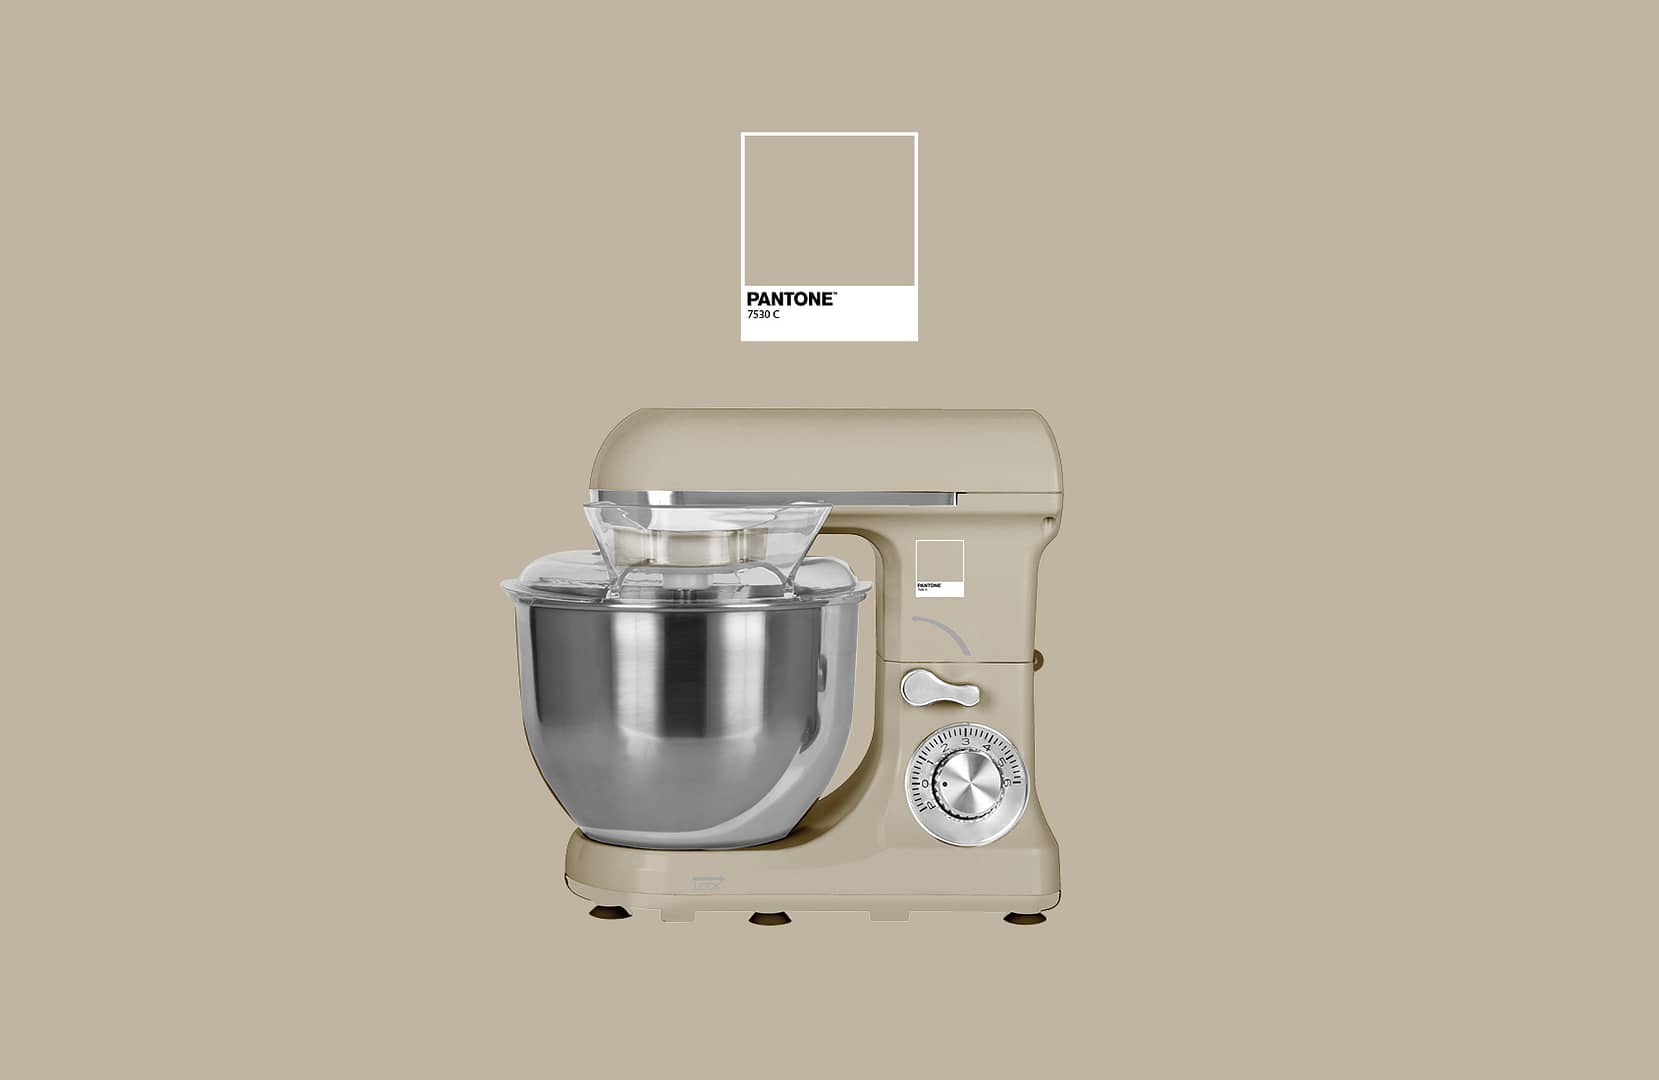 CMF design for the application of new color distributions - taupe - to small appliances designed by Bimar & Pantone